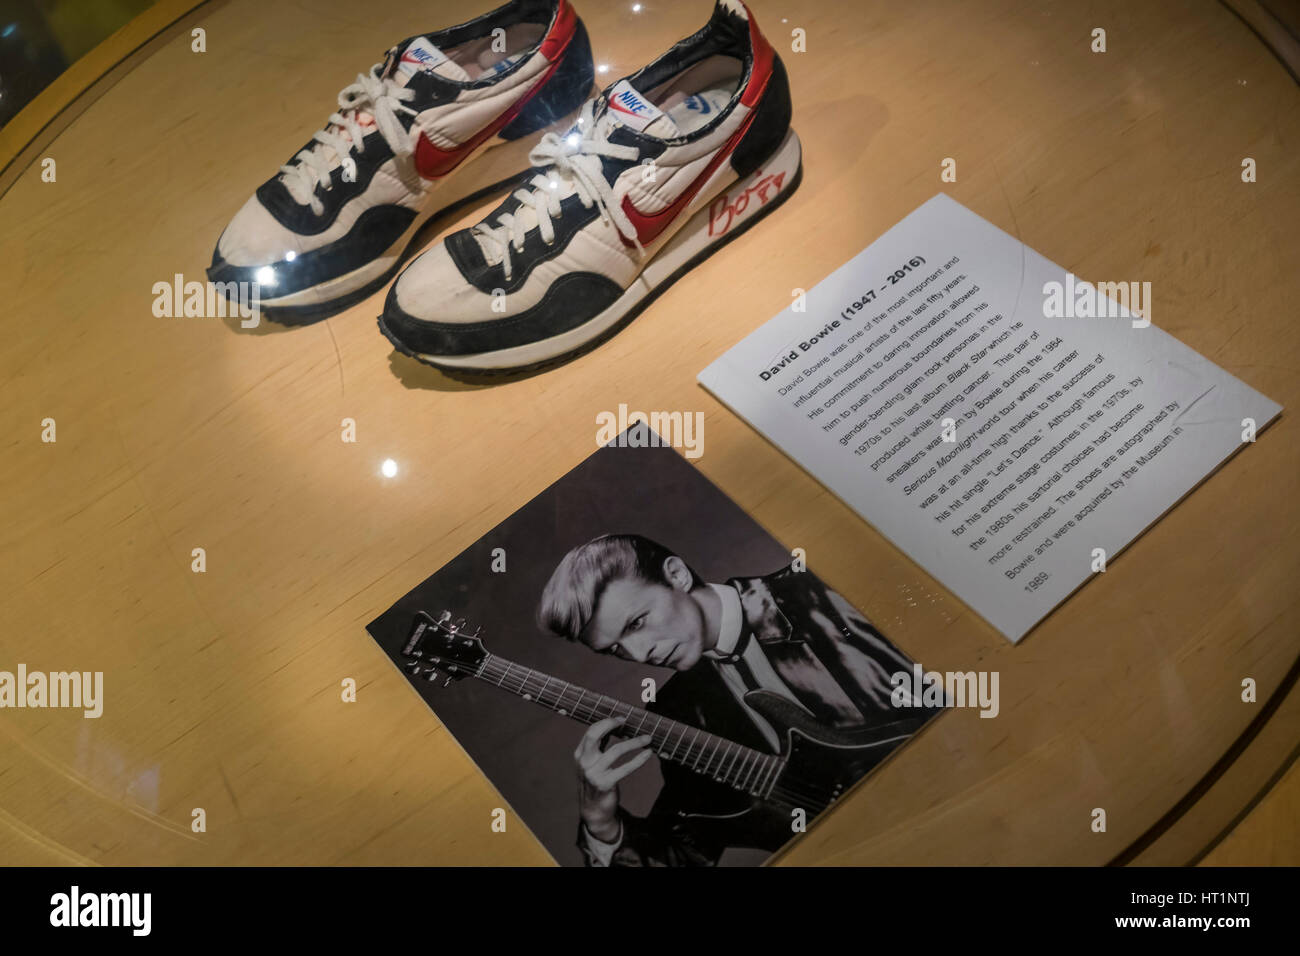 Nike running shoes worn by David Bowie found at the Bata Shoe Museum in Toronto Canada. Stock Photo